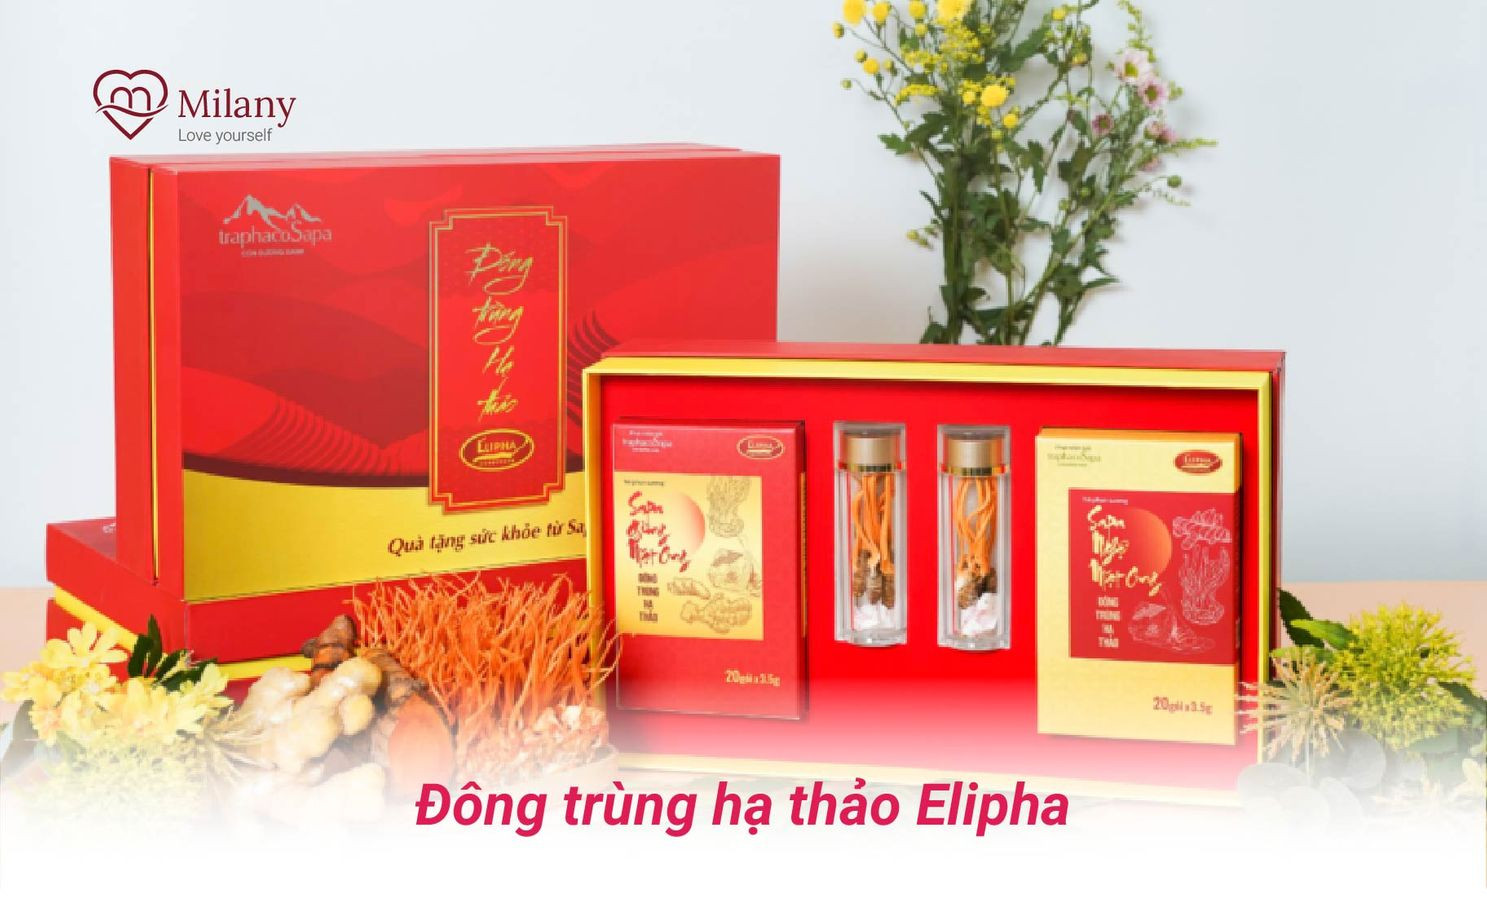 dong-trung-ha-thao-elipha-milany